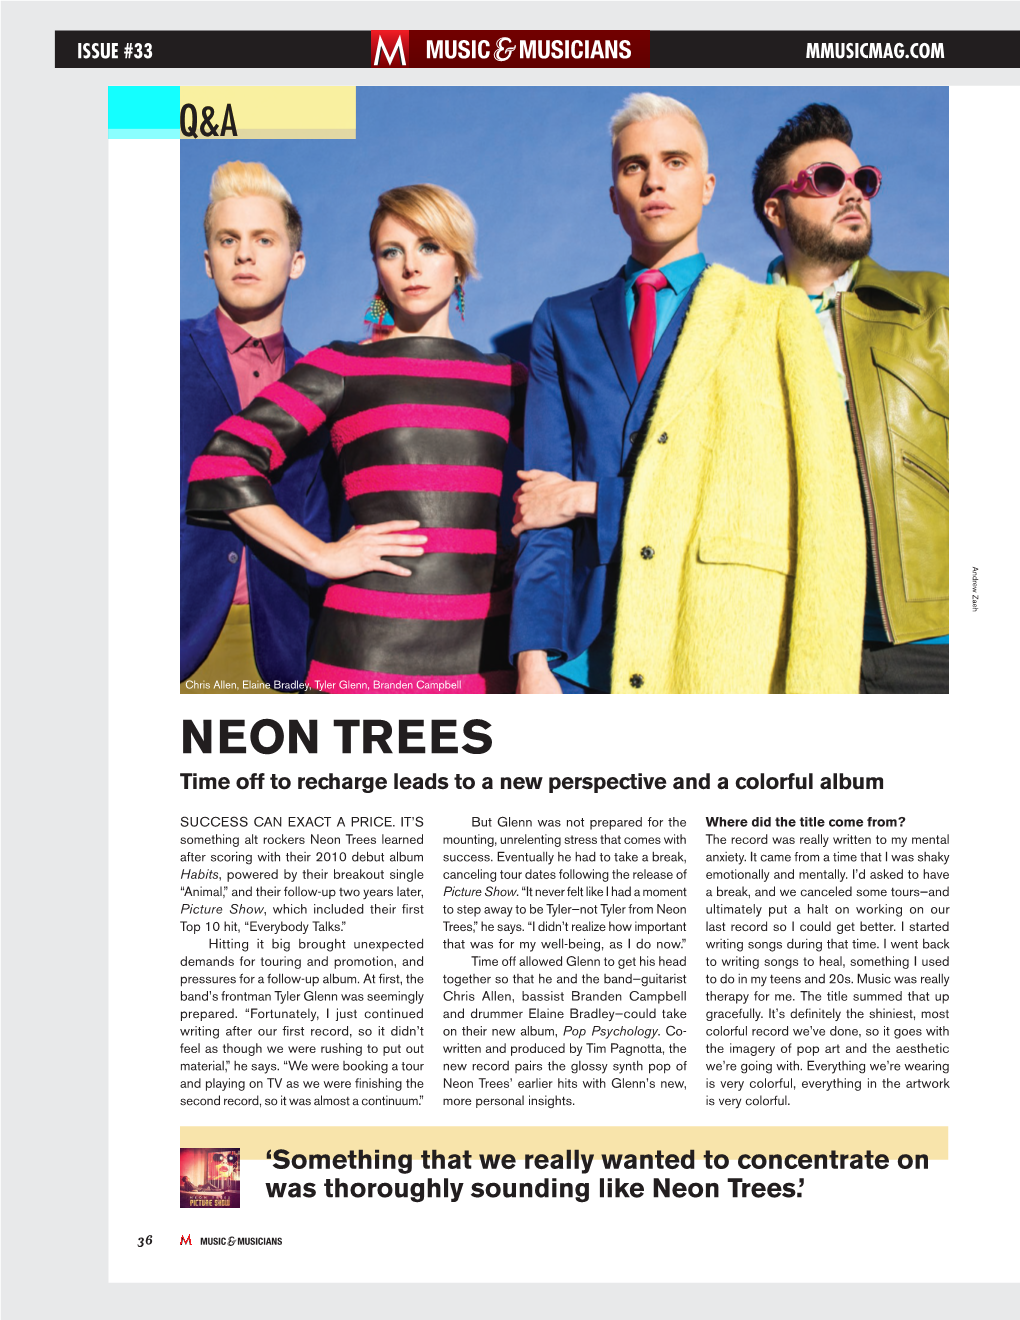 Neon Trees Time Off to Recharge Leads to a New Perspective and a Colorful Album